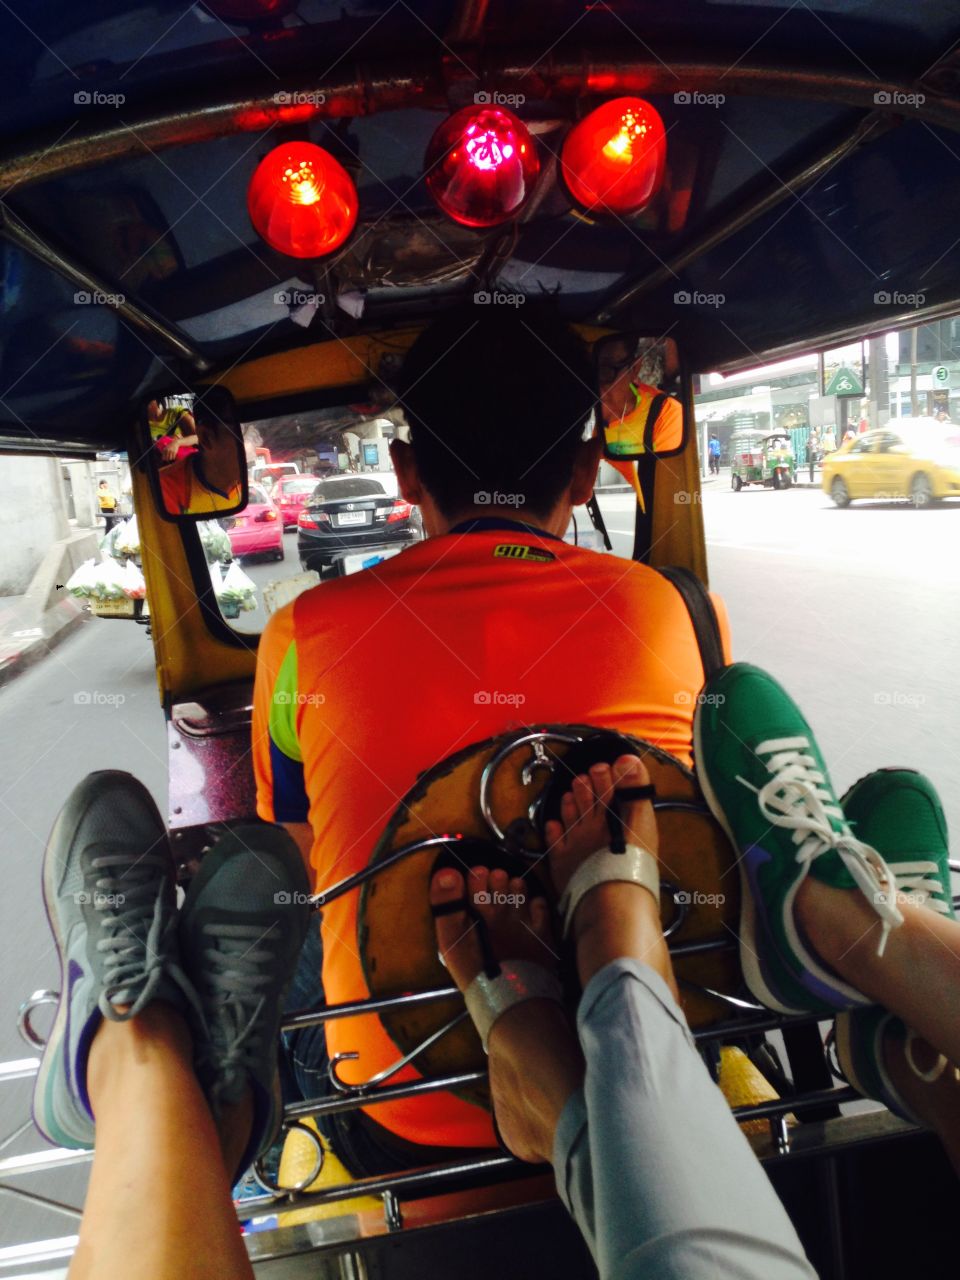 This is how we ride tuktuk